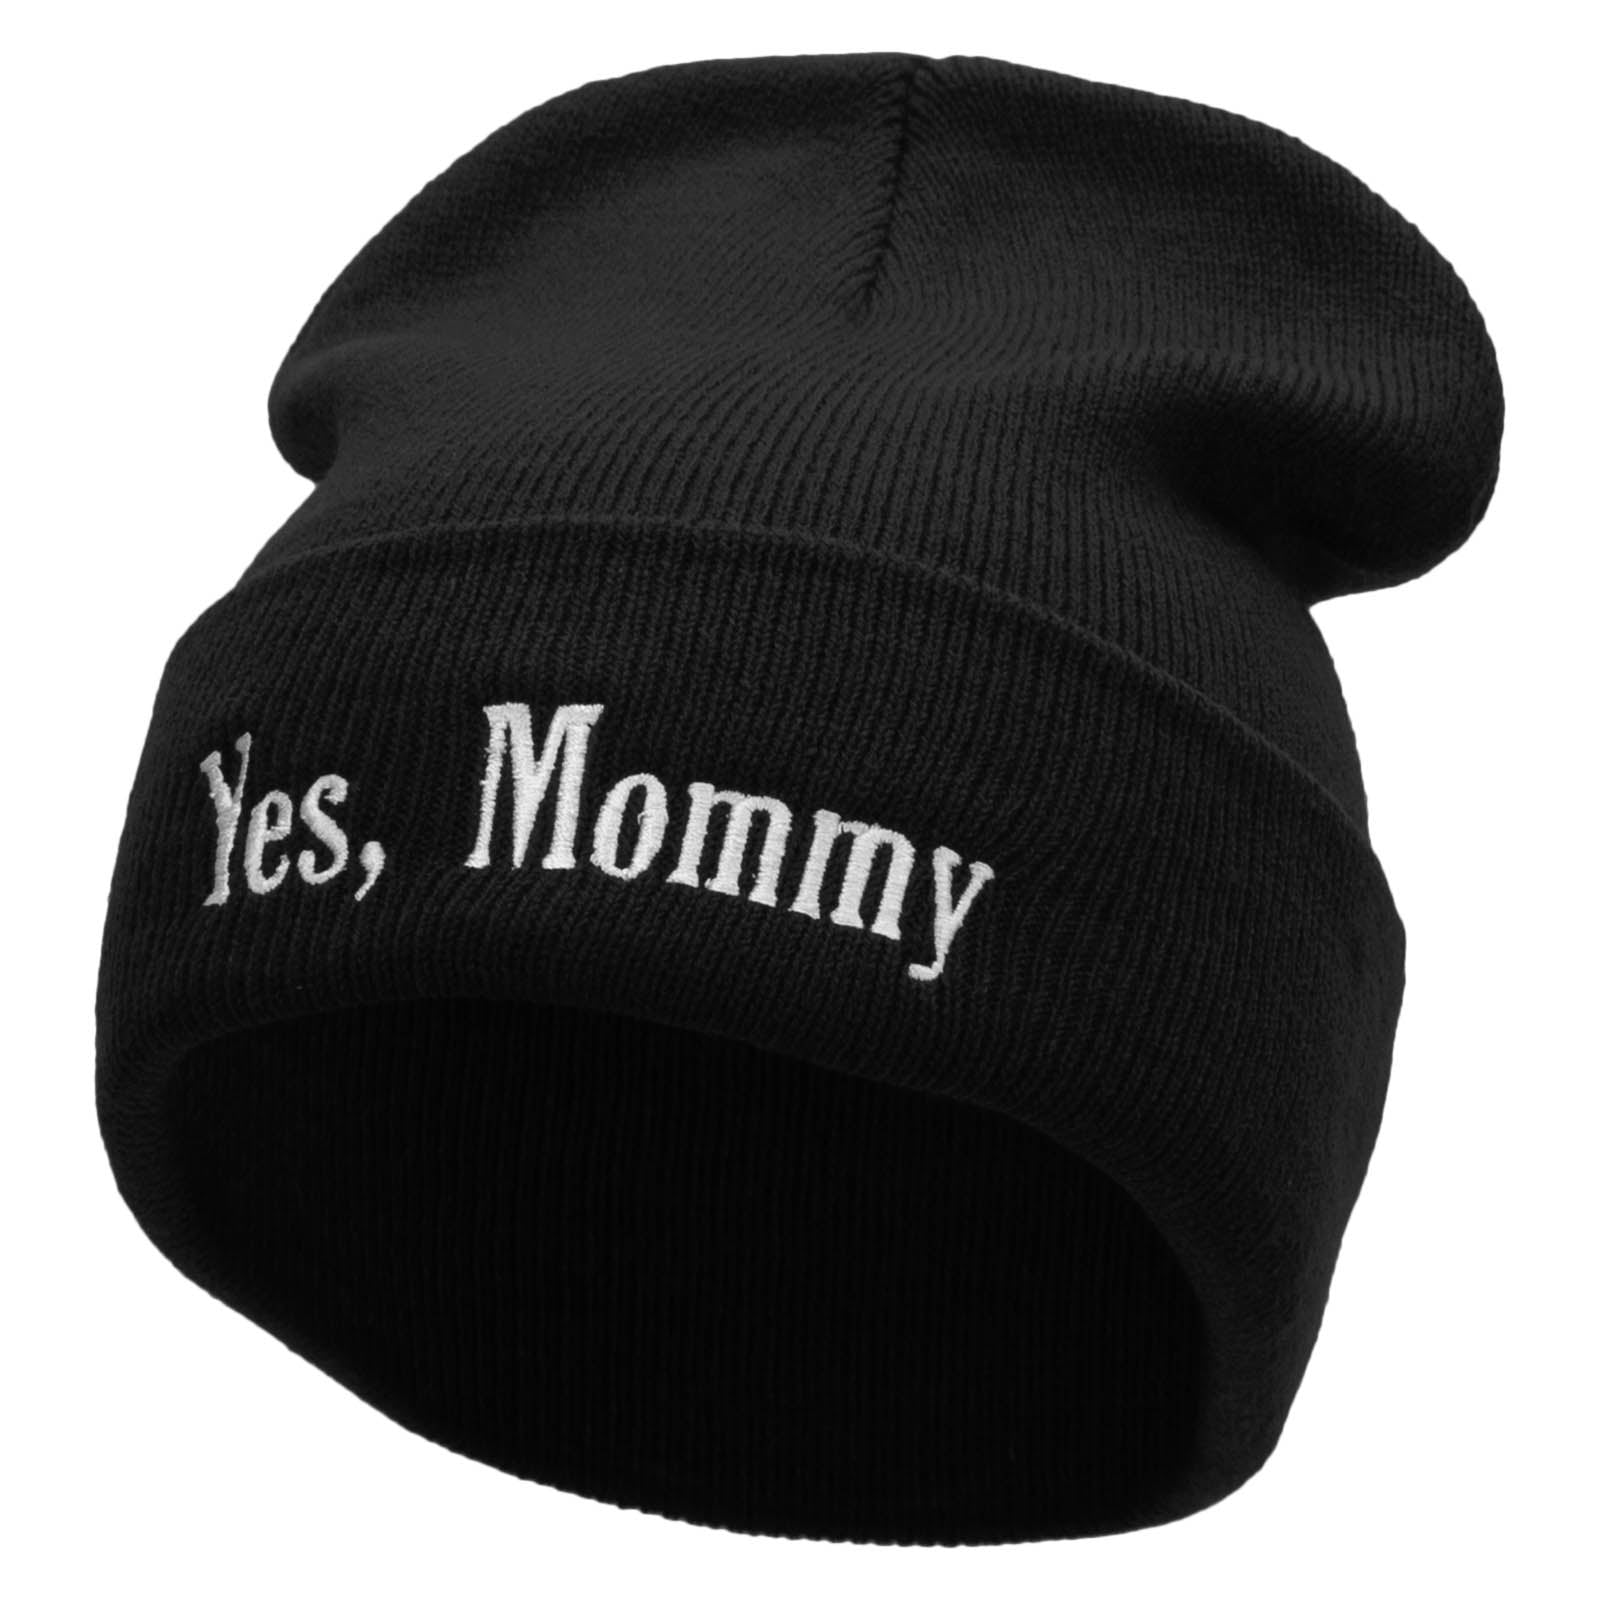 Yes, Mommy Embroidered 12 Inch Long Knitted Beanie - Black OSFM